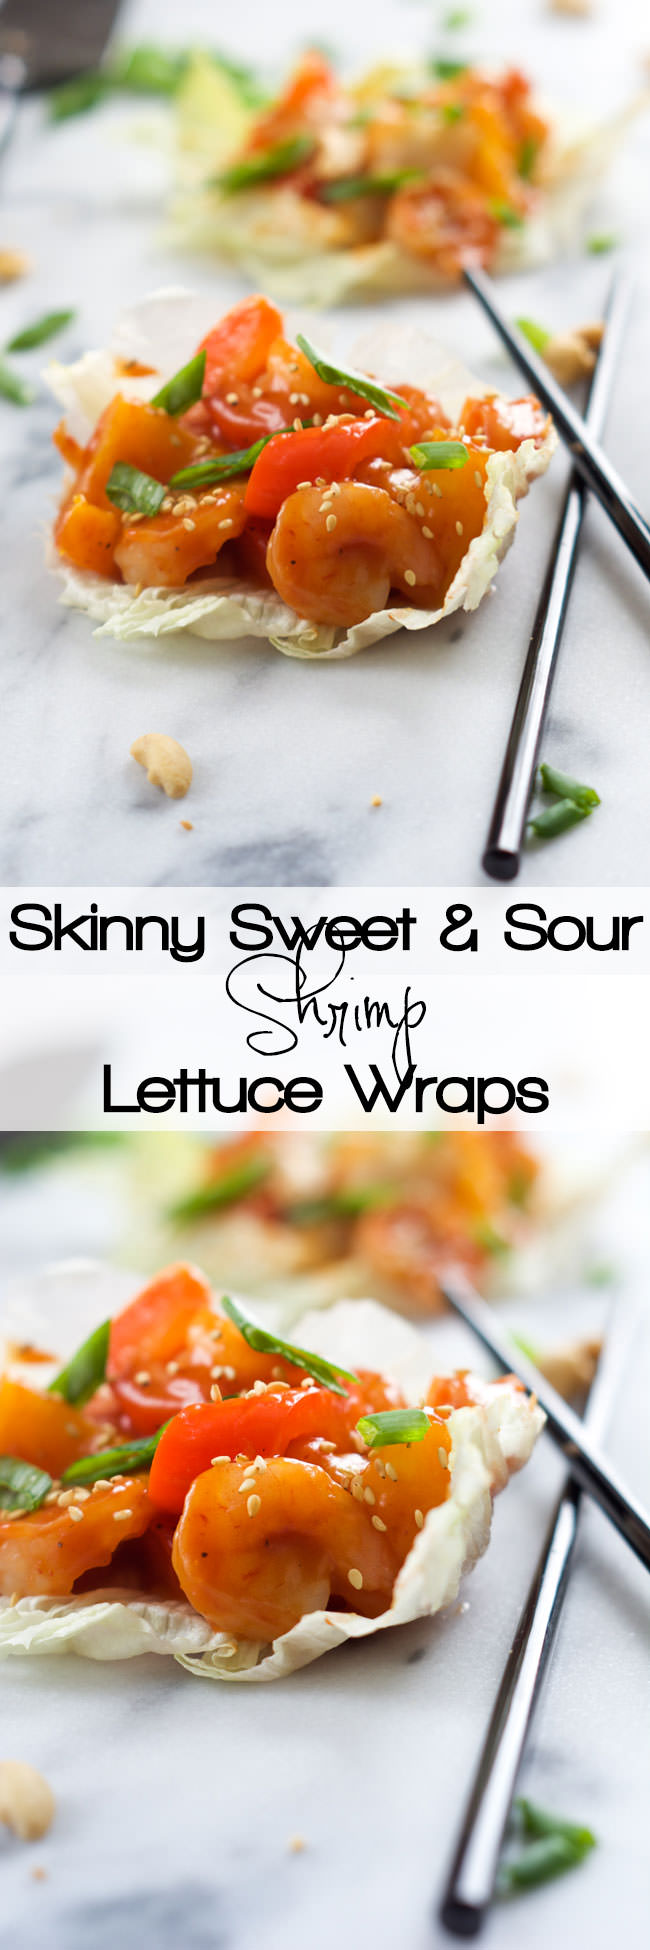 A healthy takeover make over! Skinny Sweet and Sour Shrimp Lettuce Wraps are full of Asian flavors, lighter and ready quicker than you can call take out!